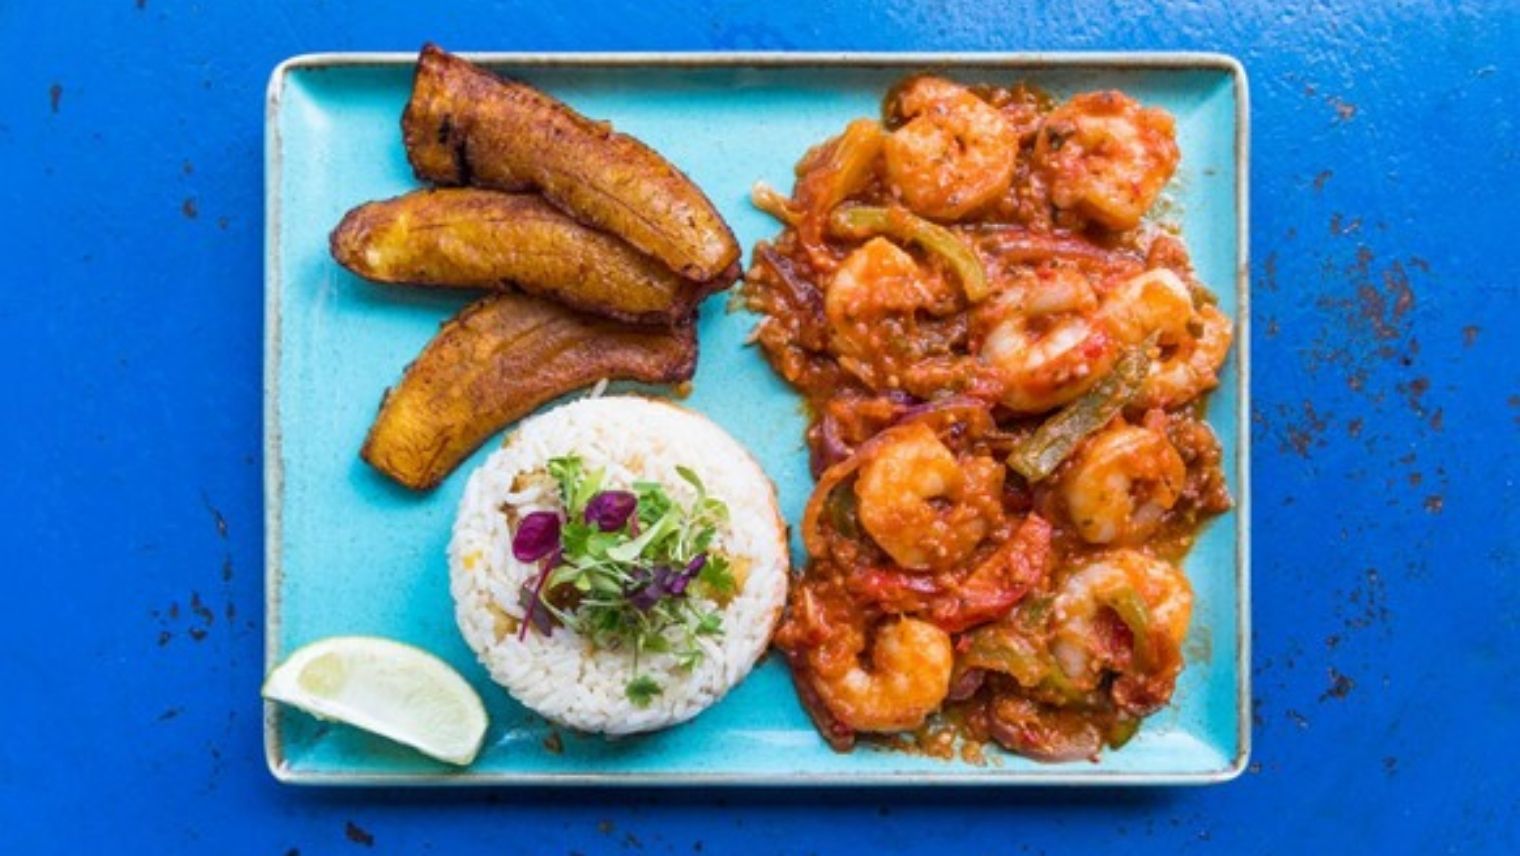 Food served on a plate at Cubana